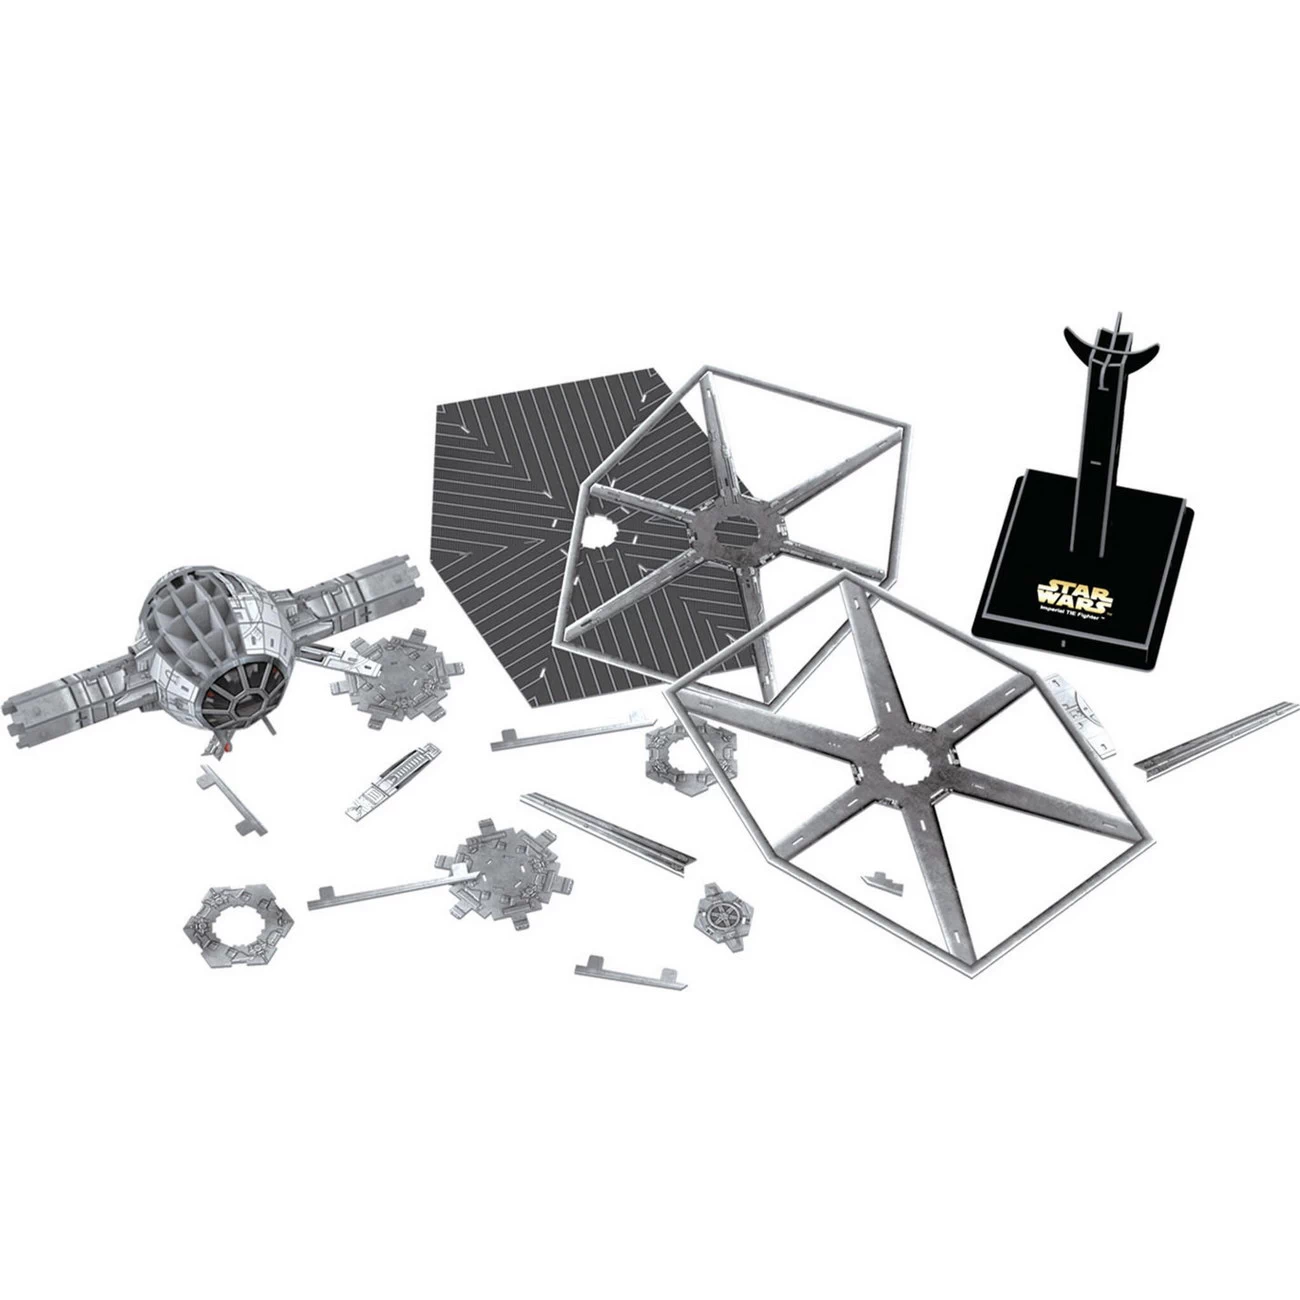 Revell 00317 - Star Wars Imperial TIE Fighter - 3D Puzzle